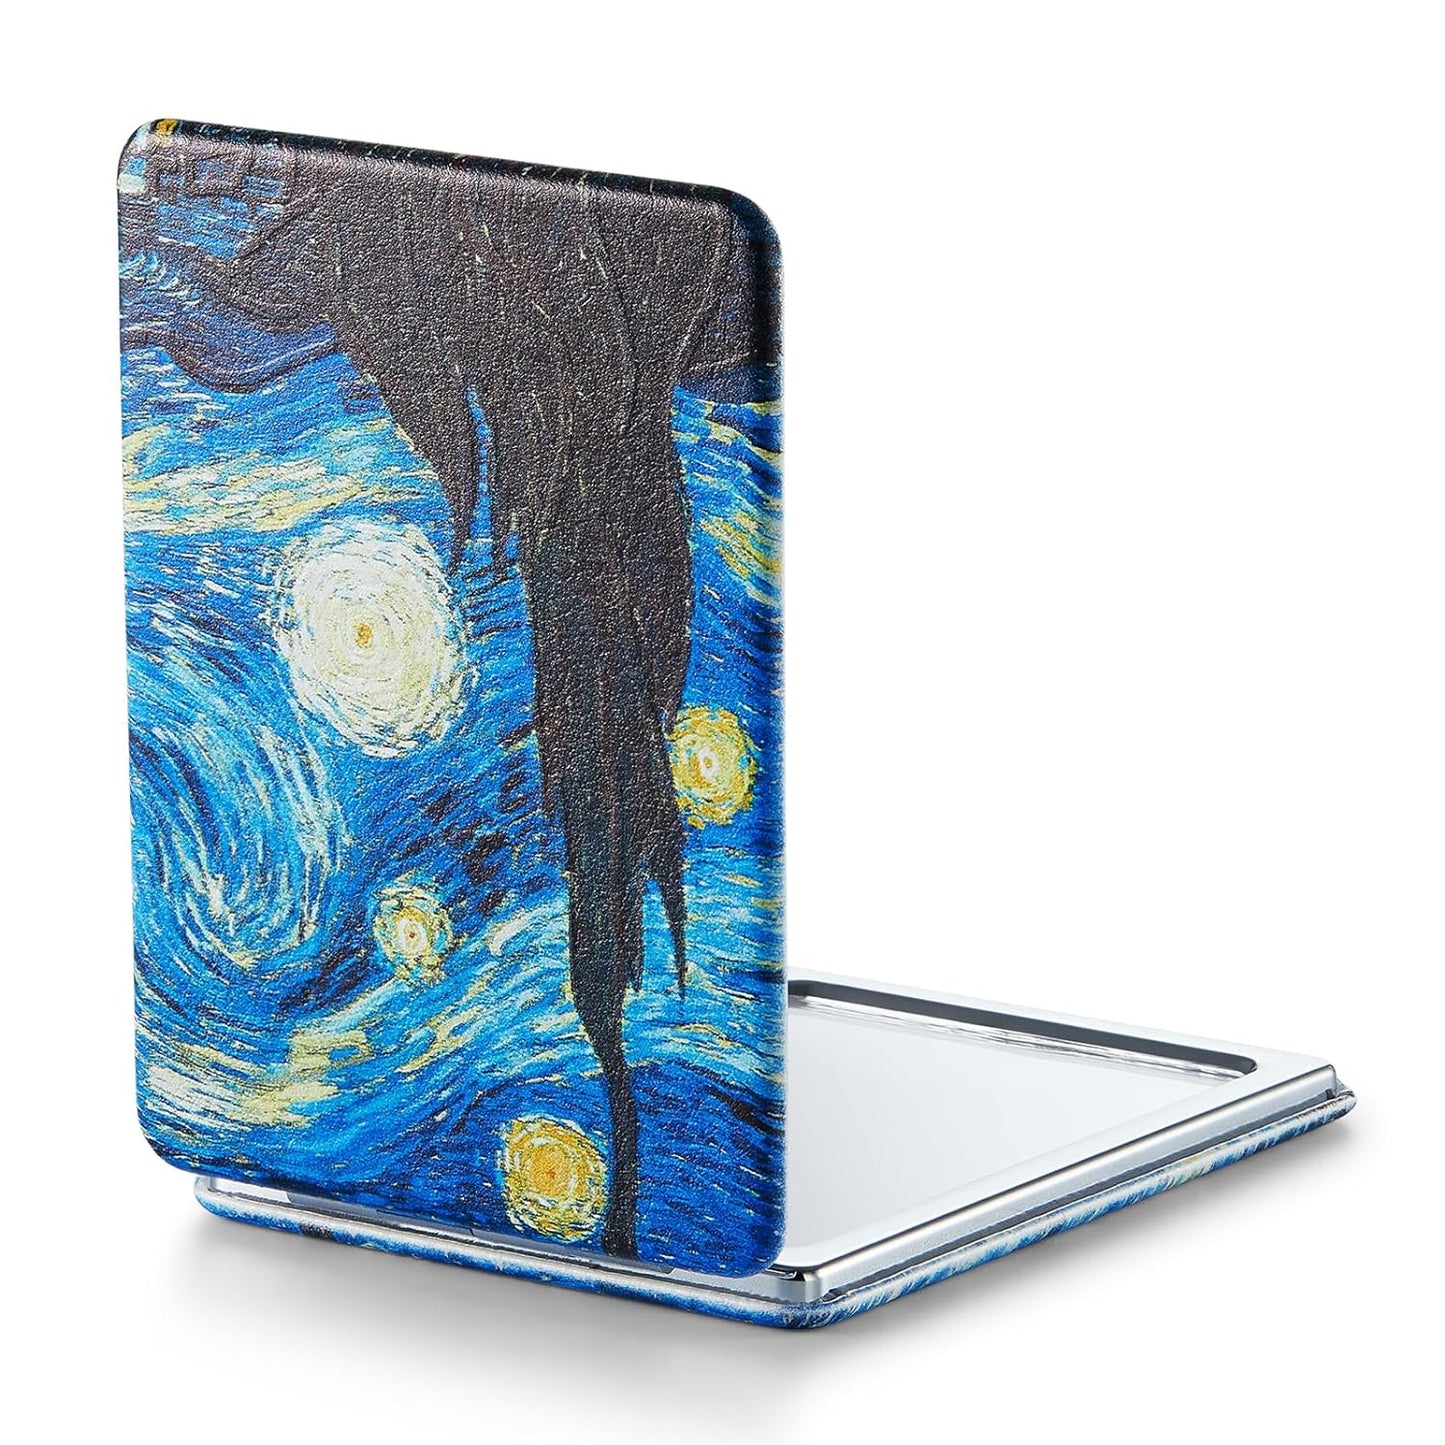 omirodirect printed compact mirror starry night